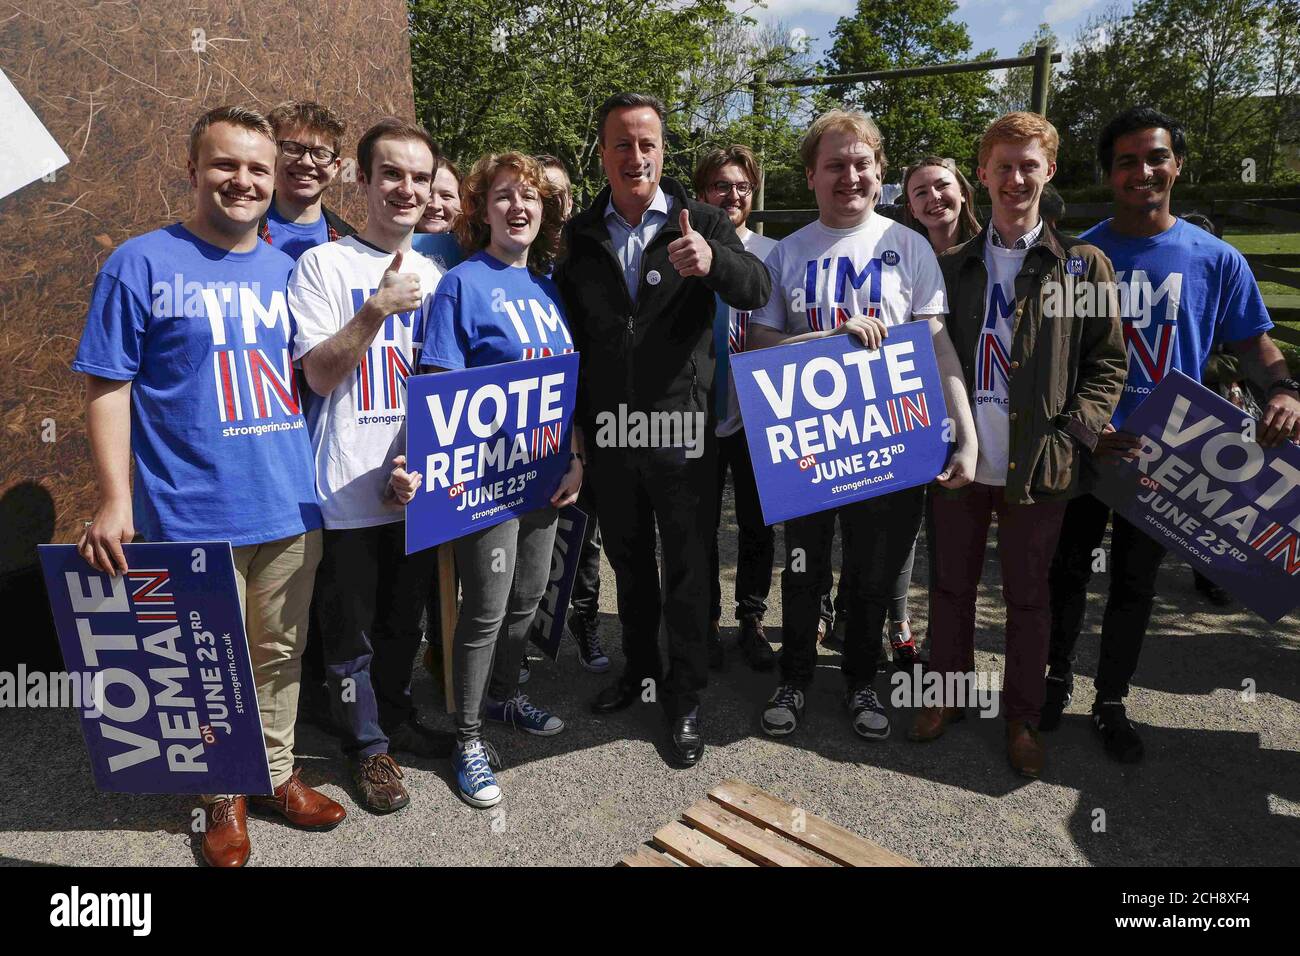 Prime Minister David Cameron poses for photos with supporters at a Remain campaign event in his Witney constituency in Oxfordshire, where he warned that a vote to leave the European Union could tip the British economy back into recession. Stock Photo